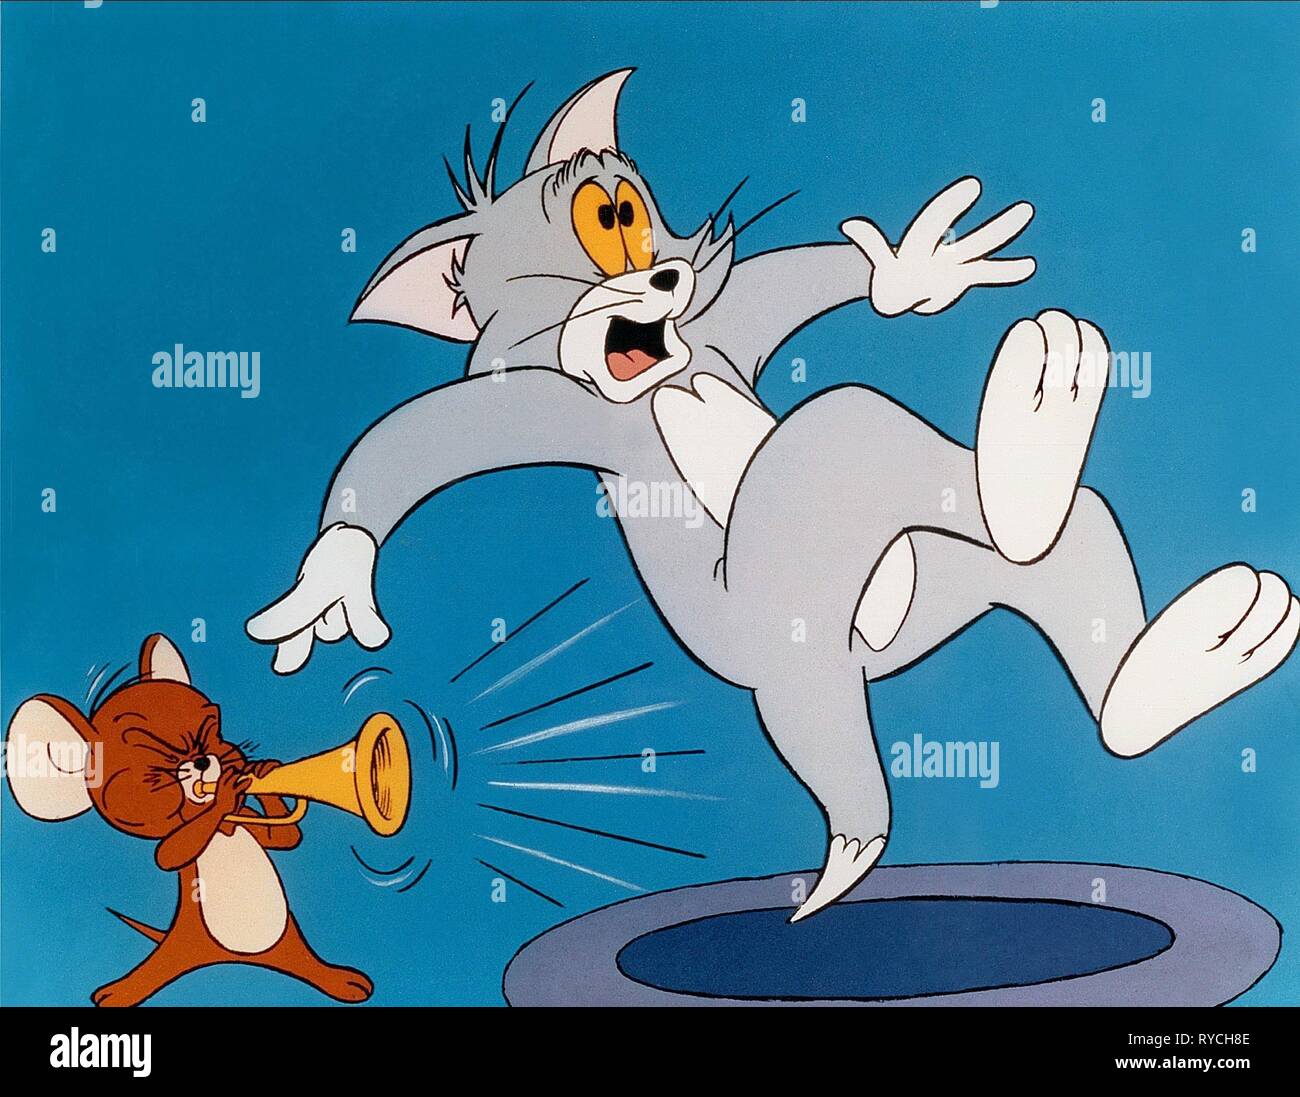 JERRY THE MOUSE, TOM THE CAT, TOM and JERRY, 1952 Stock Photo - Alamy